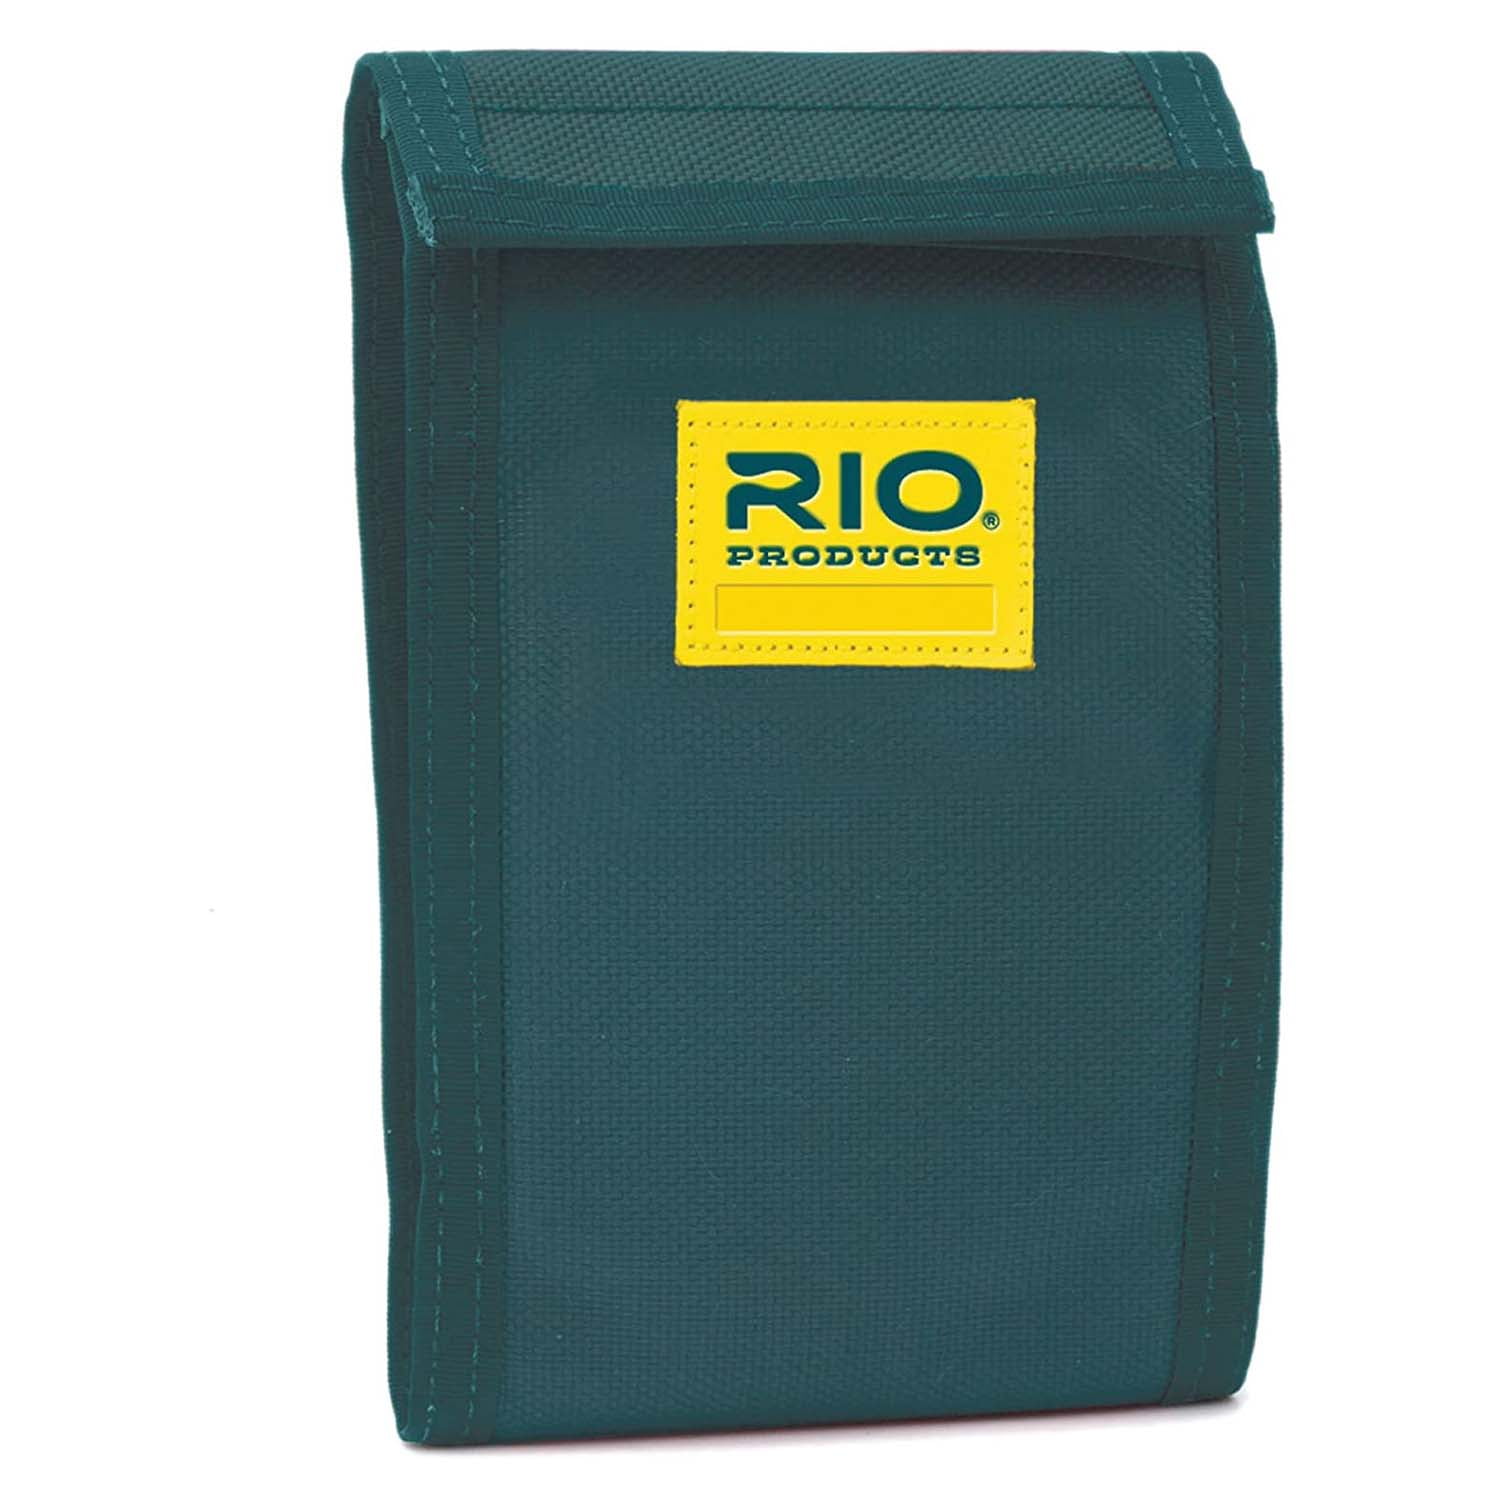 Rio Products 6 Pocket Fly Fishing Accessories Plastic Leader Wallet